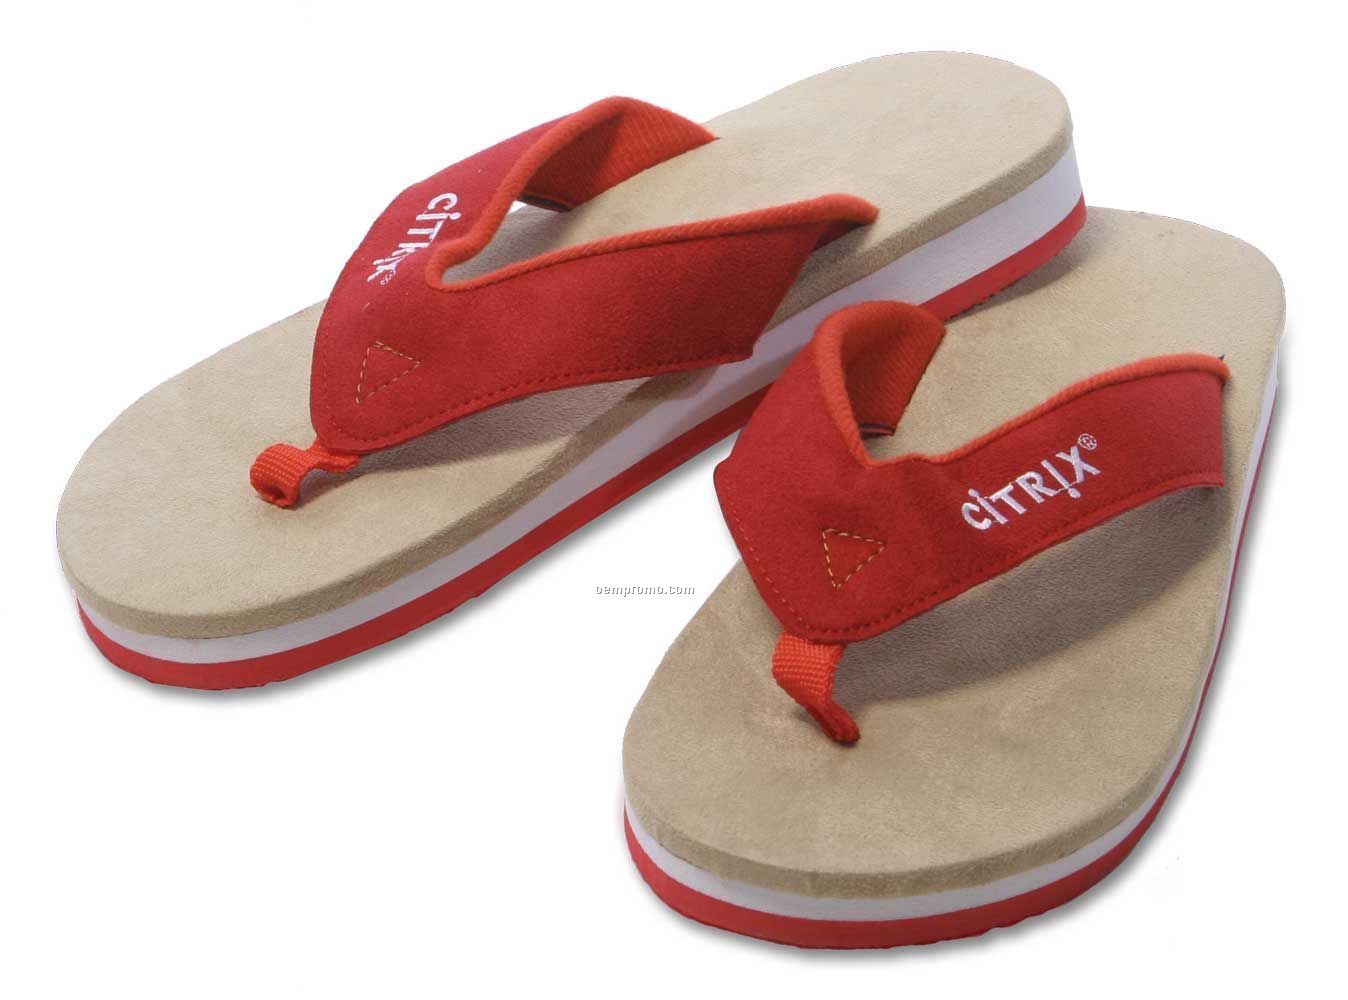 Malibu Ultra Surf Style Flip Flop With Embroidered Suede Straps